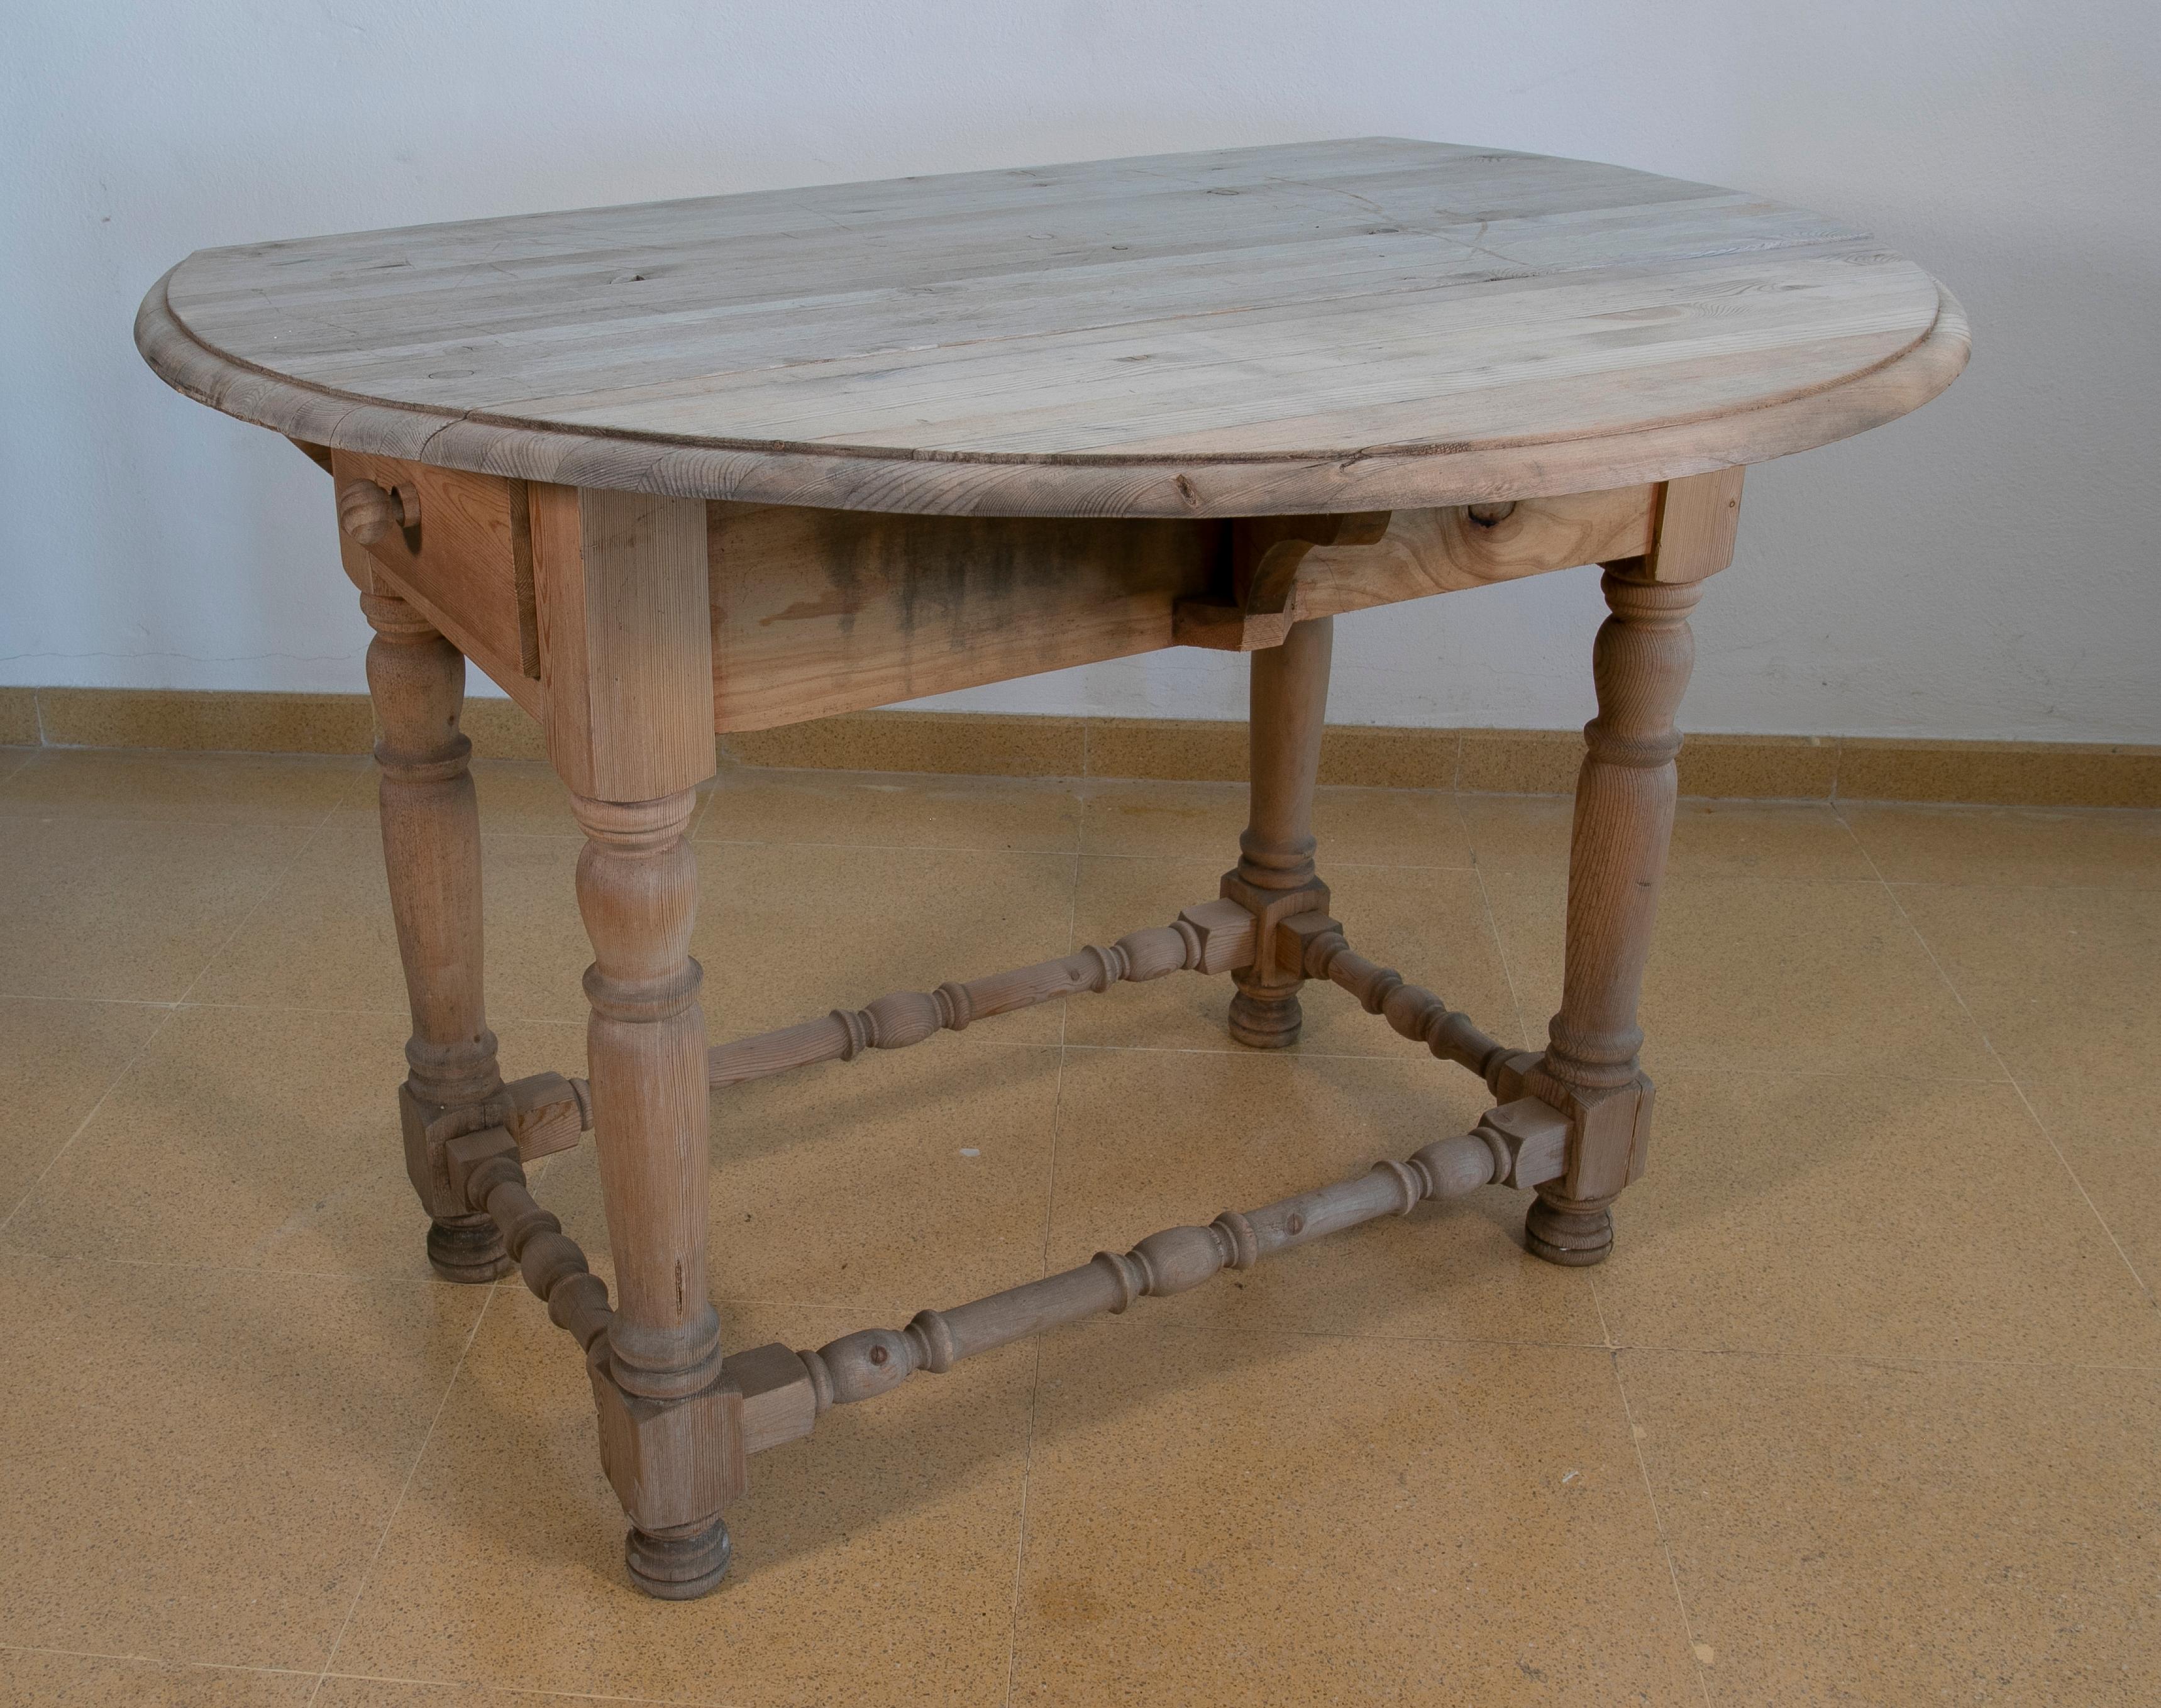 Spanish table with pine wooden wings and drawers
The dimensions are with the table open.
 